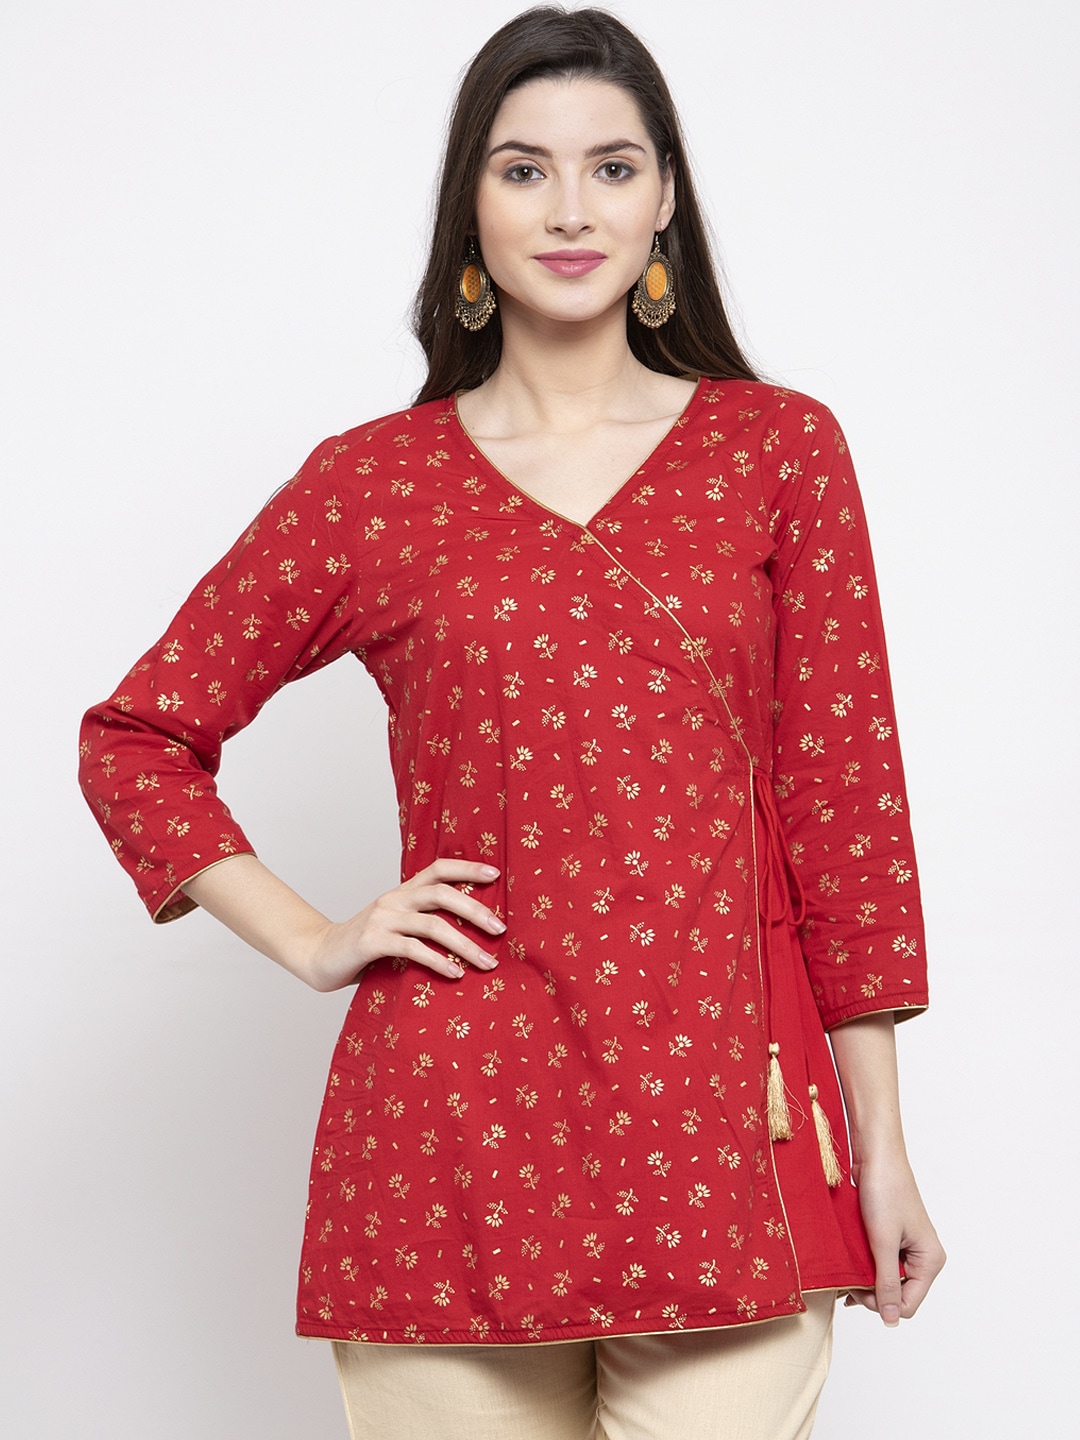 Bhama Couture Women Red & Golden Foil Print Angrakha Tunic Price in India